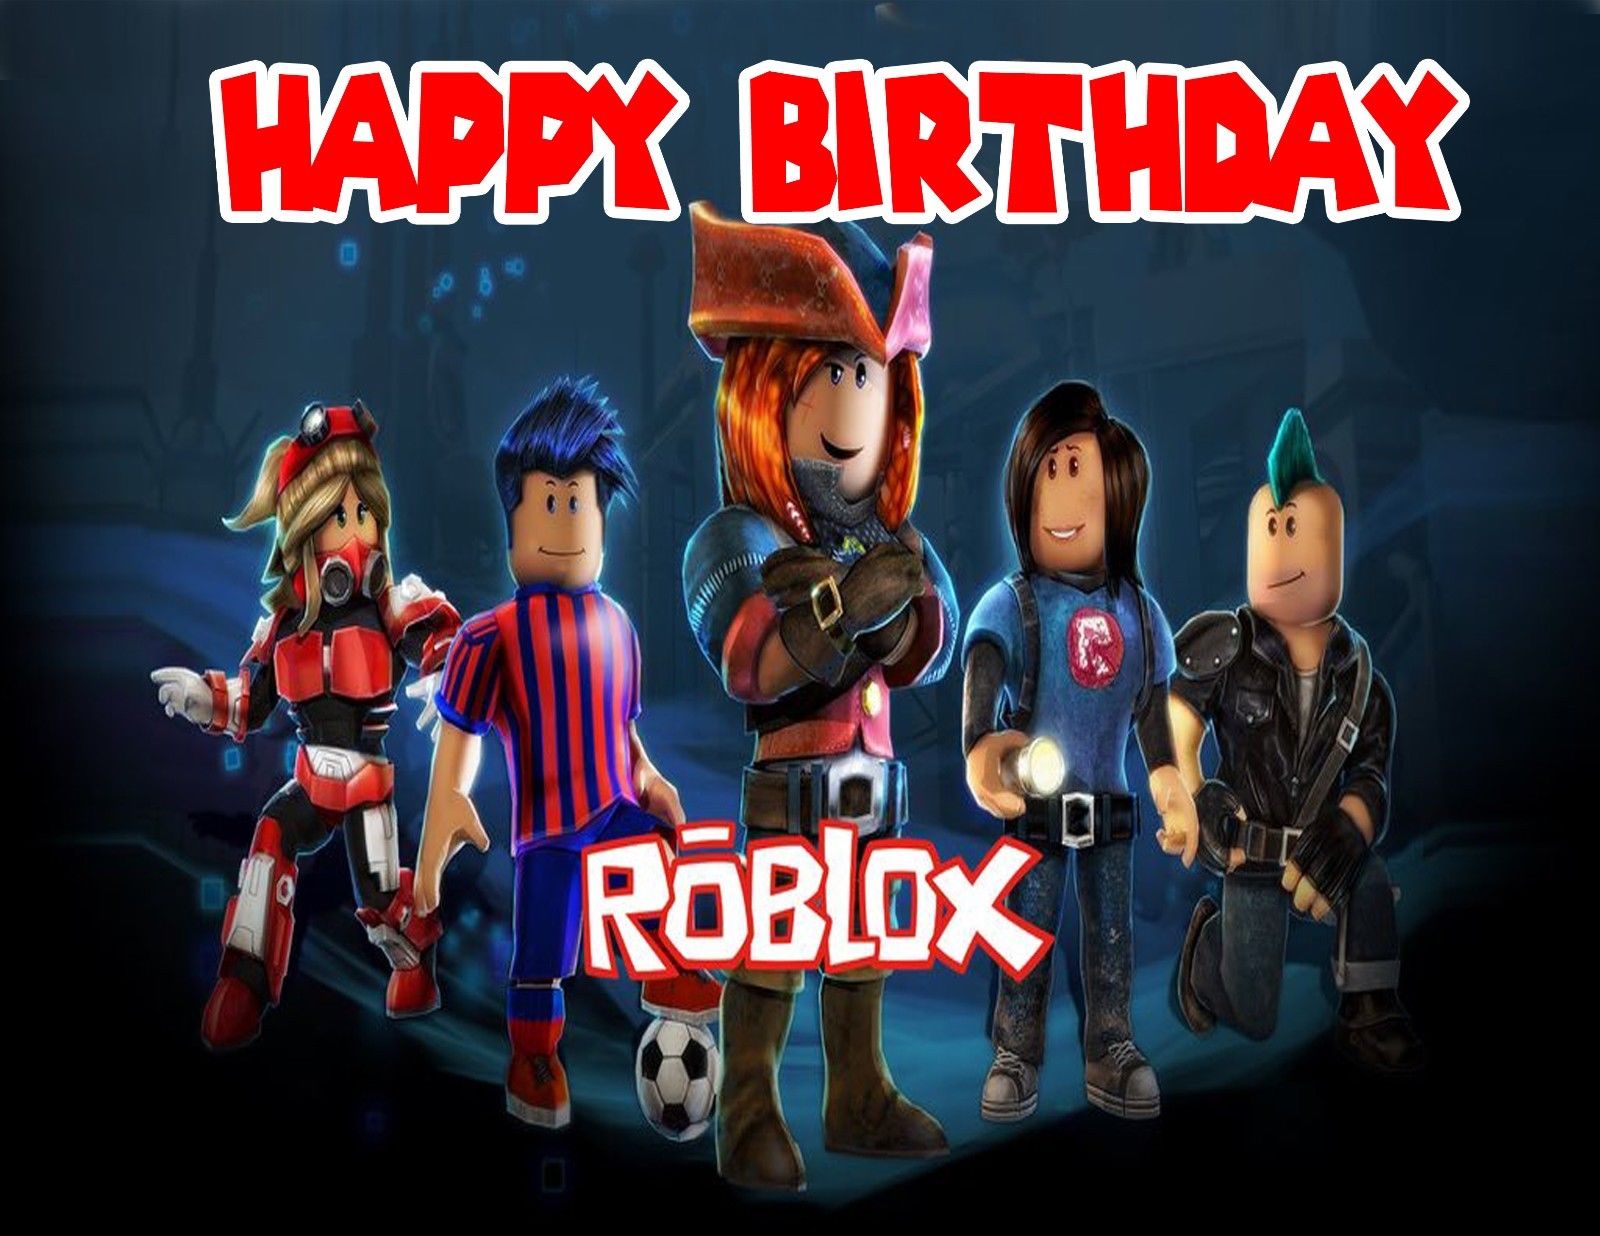 Roblox Personalized Edible Print Premium Cake Topper Frosting Sheets 5 Edible Toppers More - roblox happy birthday cake topper